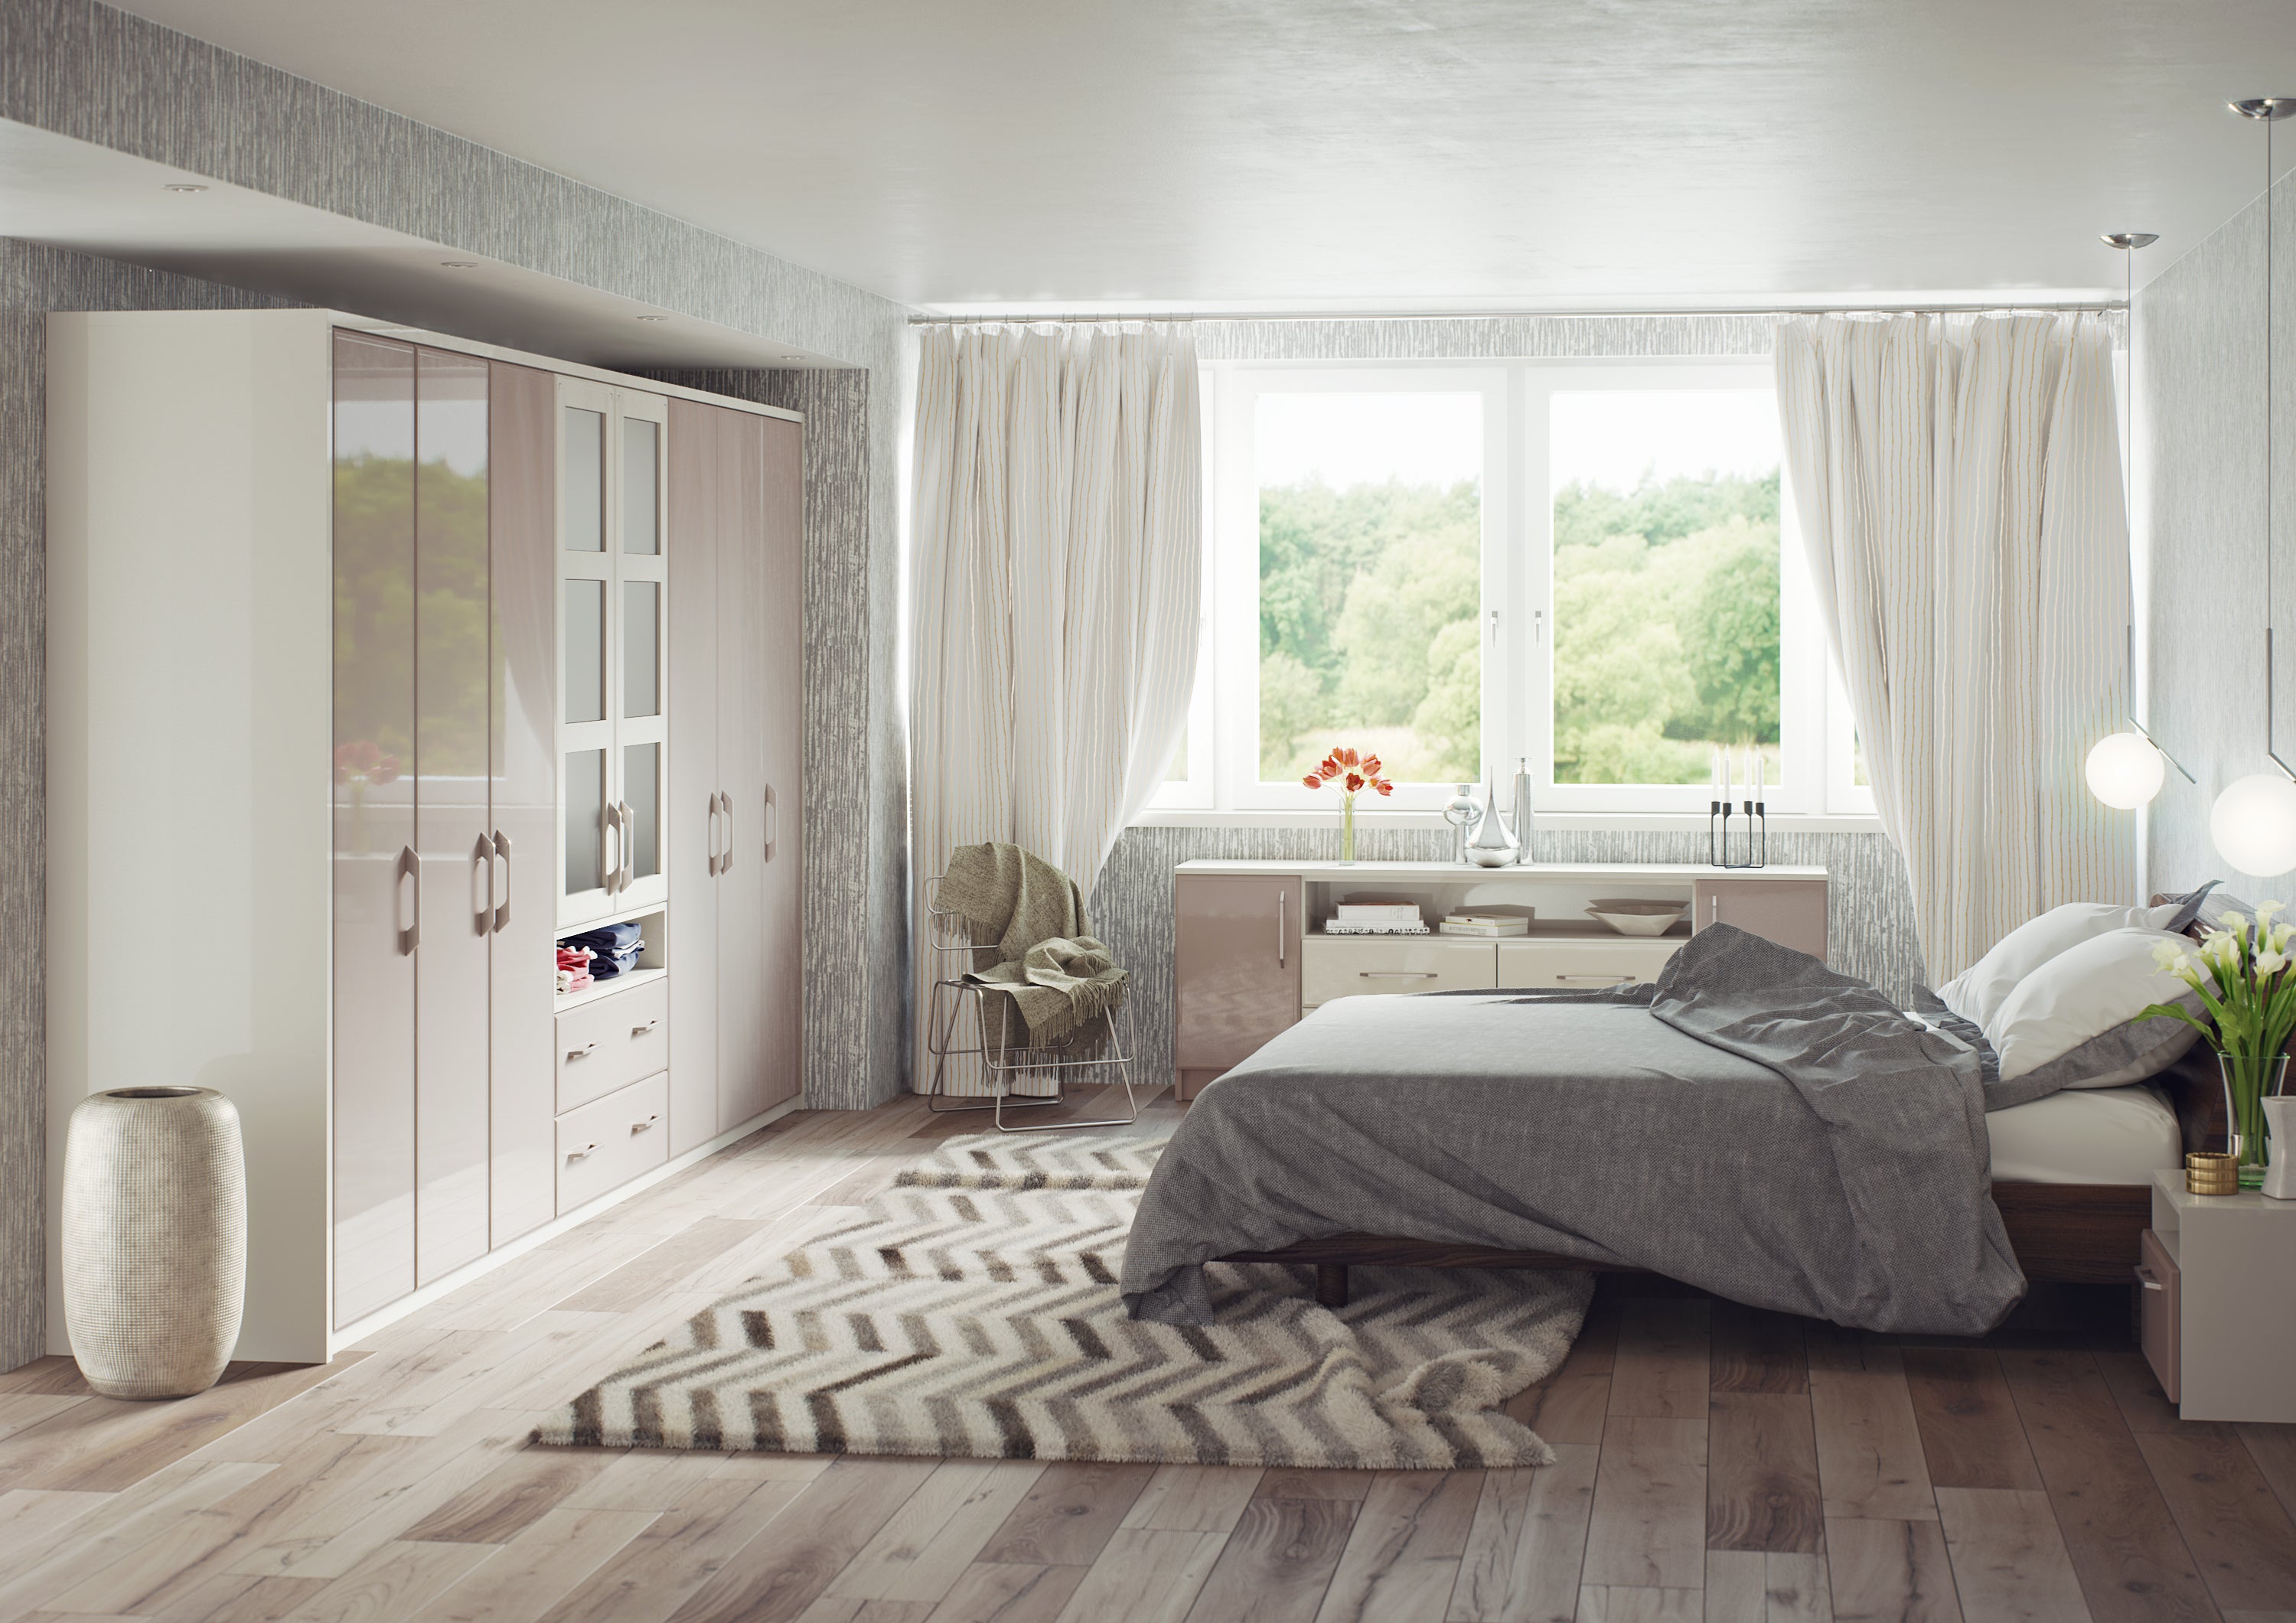 Contemporary bedroom with Turin style cupboard doors